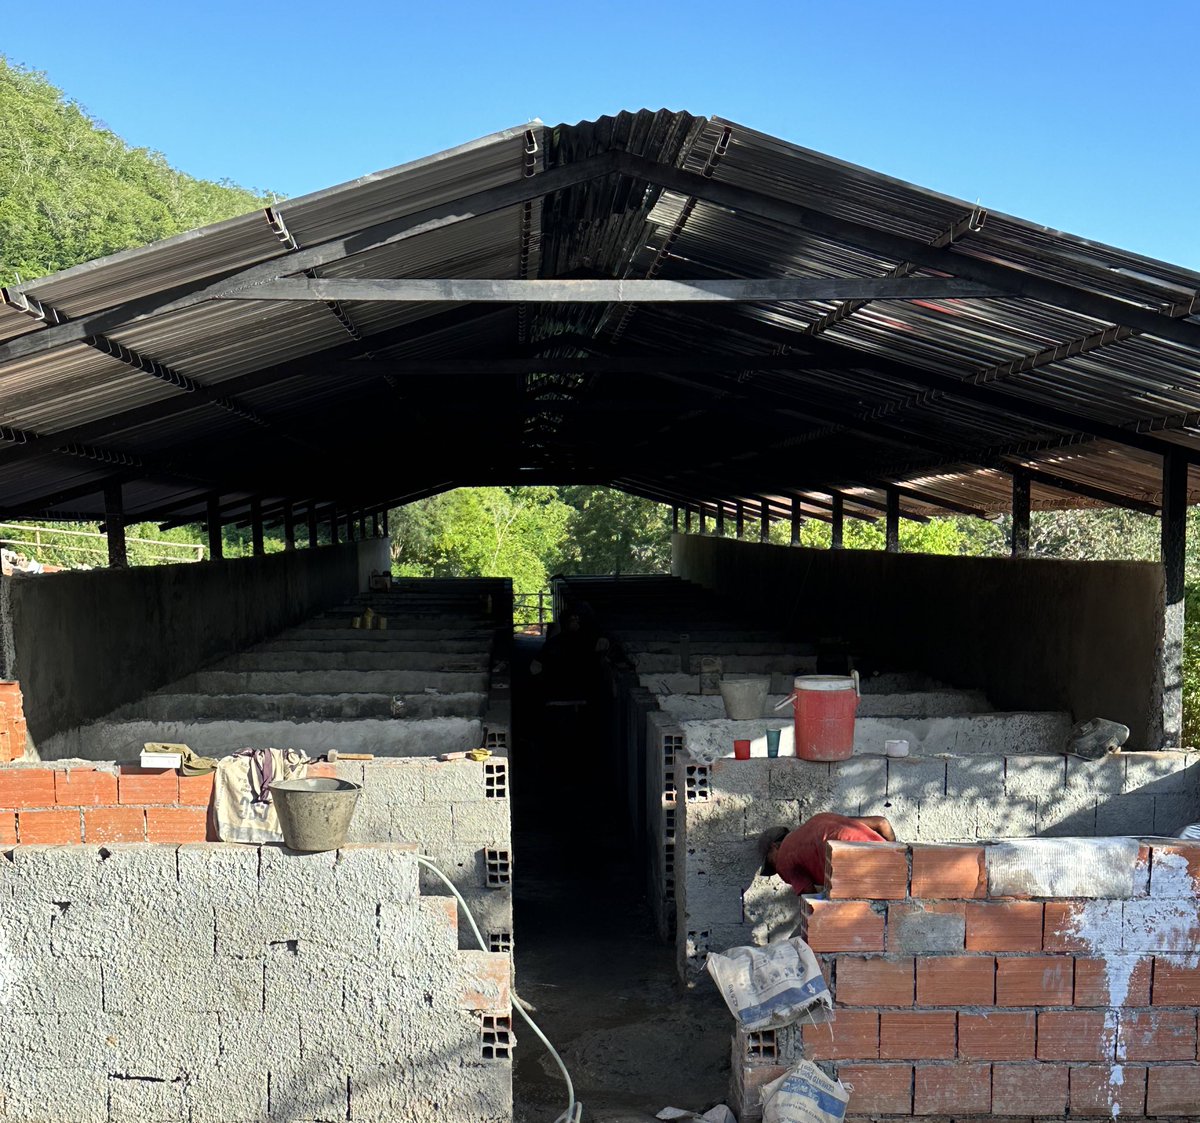 We continue with the work in the shelter, the walls have been raised, both ends are missing but we must bring the evaporators to close to size 🙏🏻 But tomorrow is pay day for the workers and we are left again without cement, which is necessary for everything what they are doing 🆘